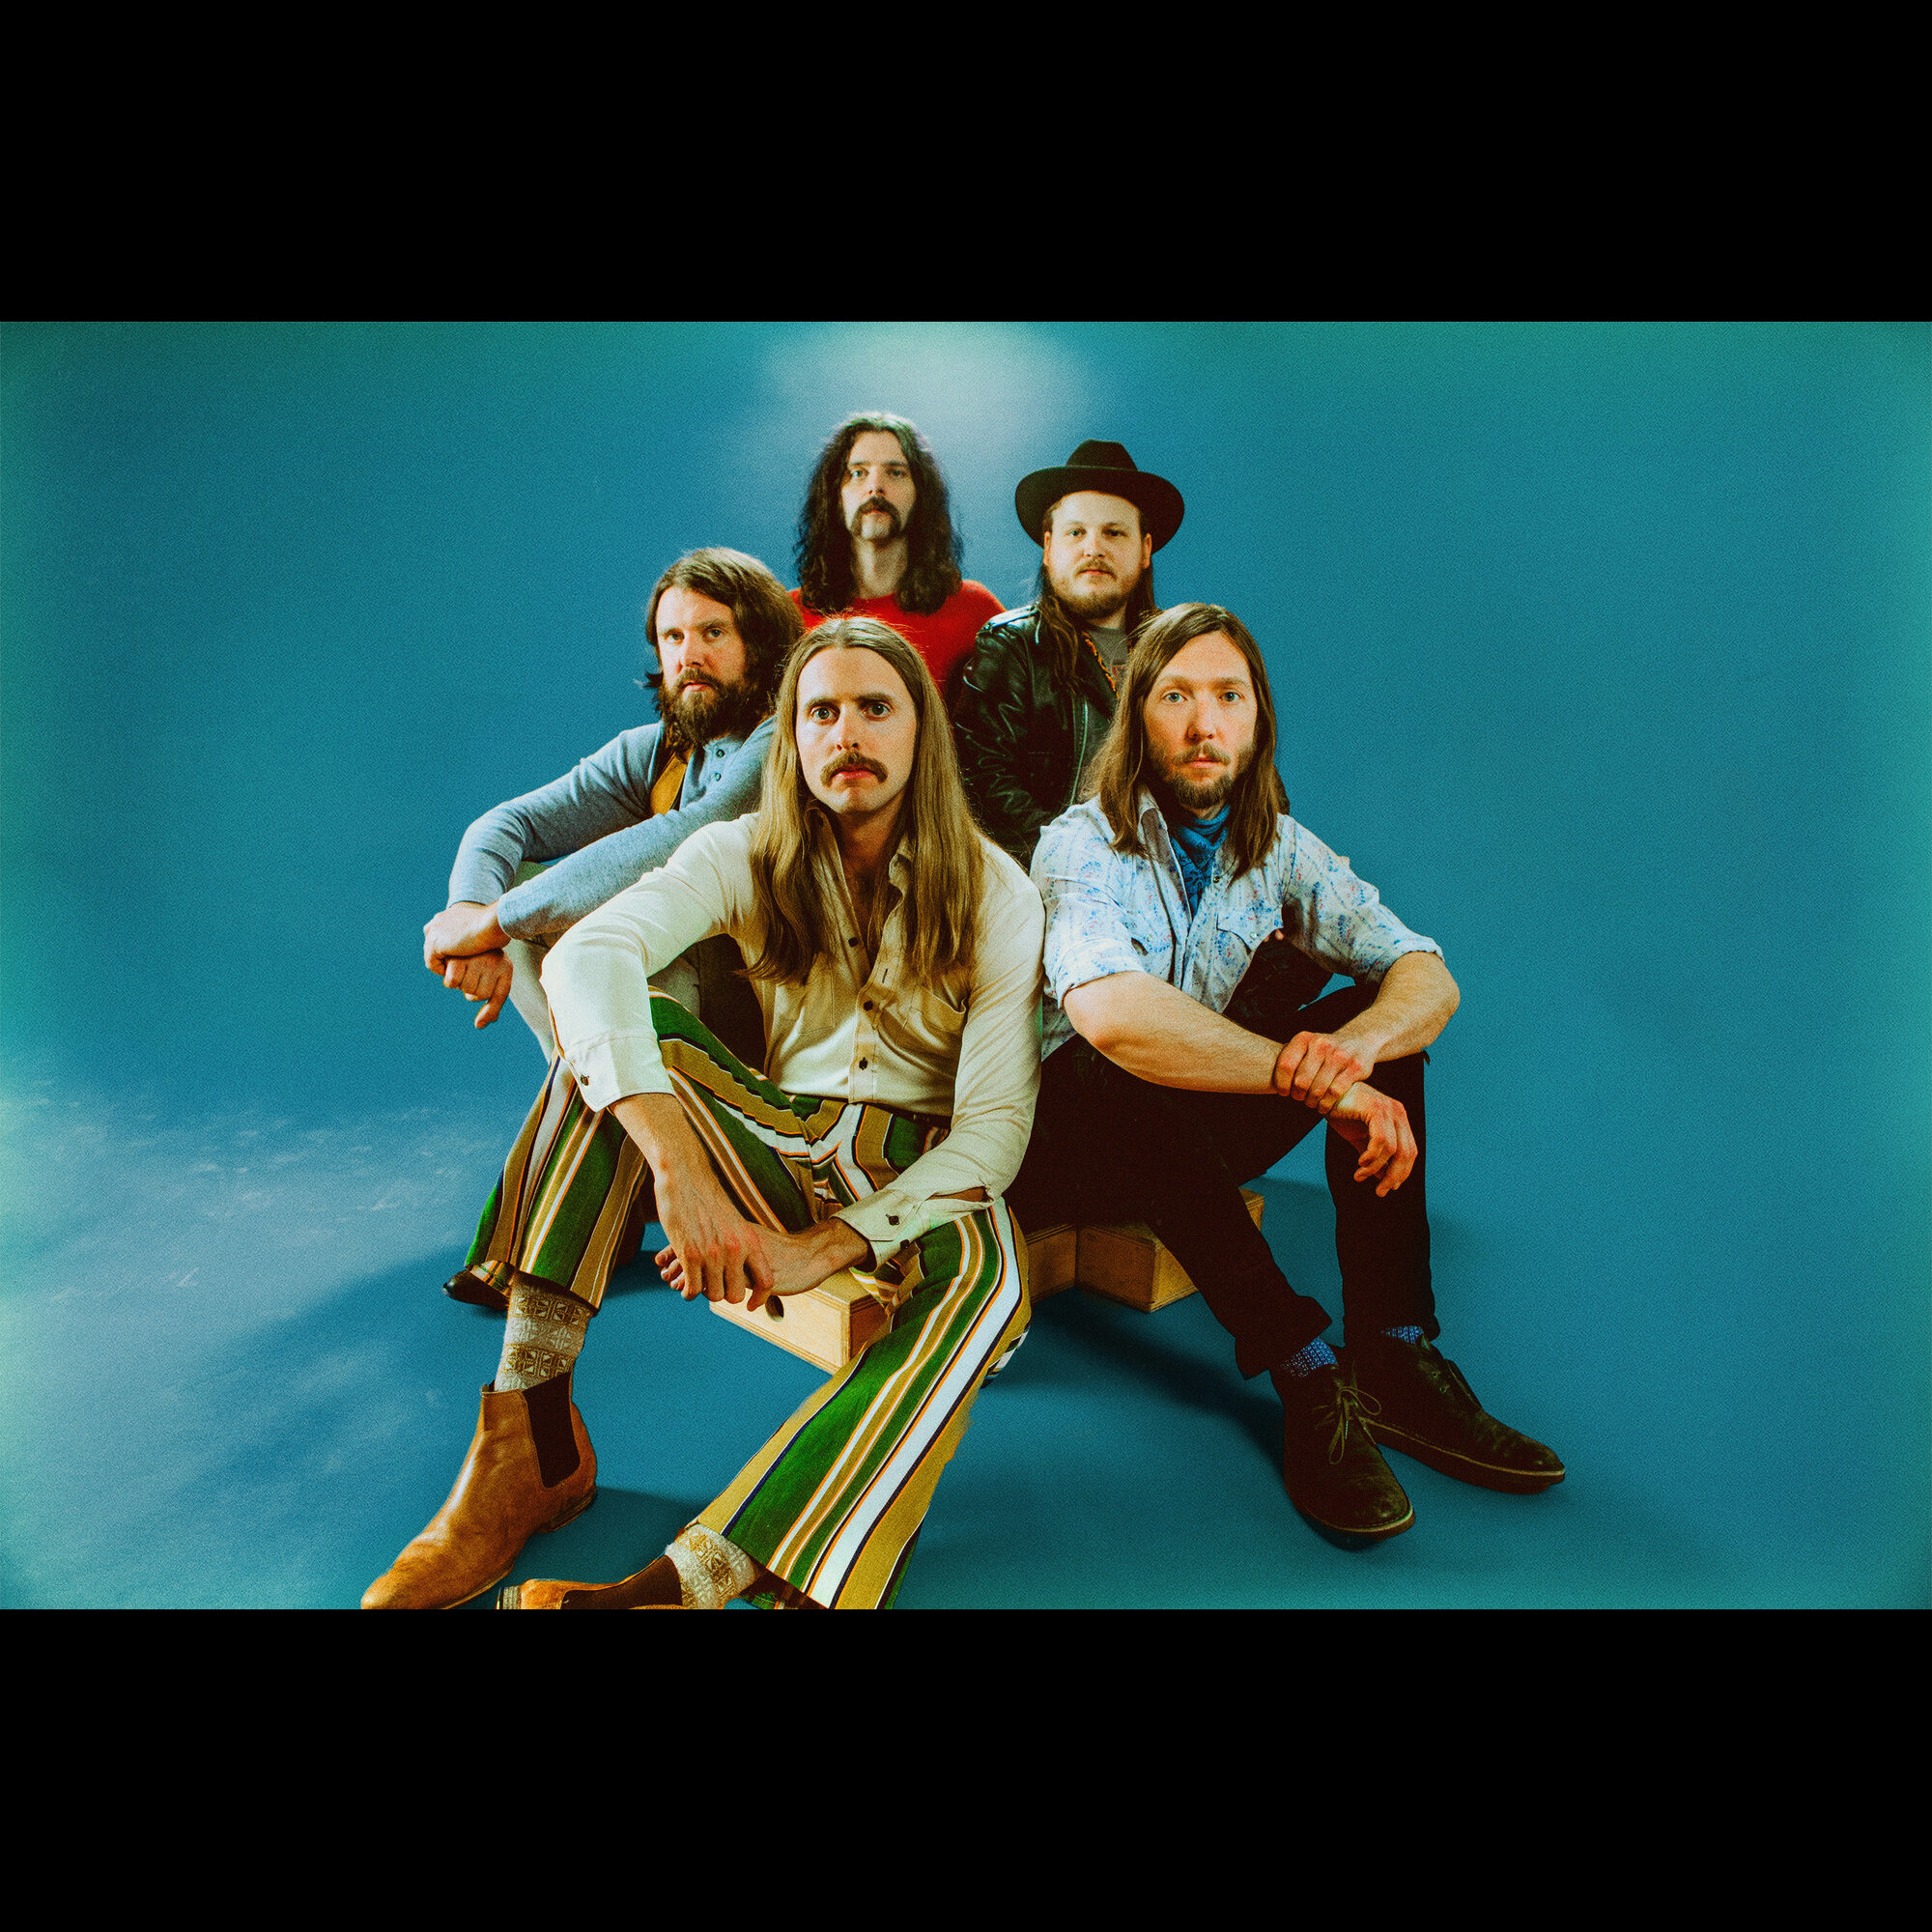 the-sheepdogs